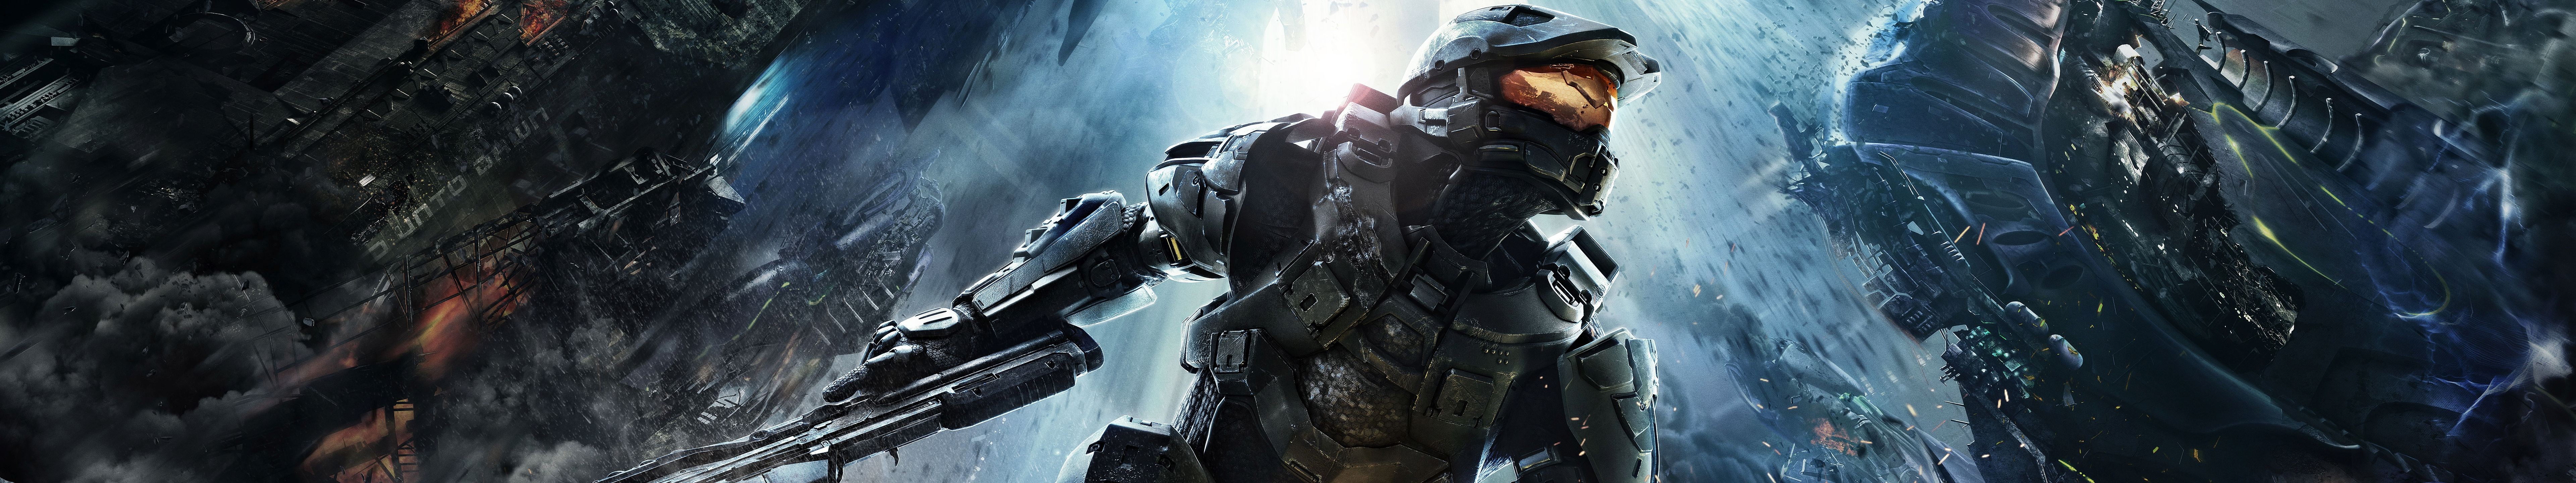 Halo 4 Masterchief Video Games Video Game Heroes Video Game Art Low Angle 7680x1440